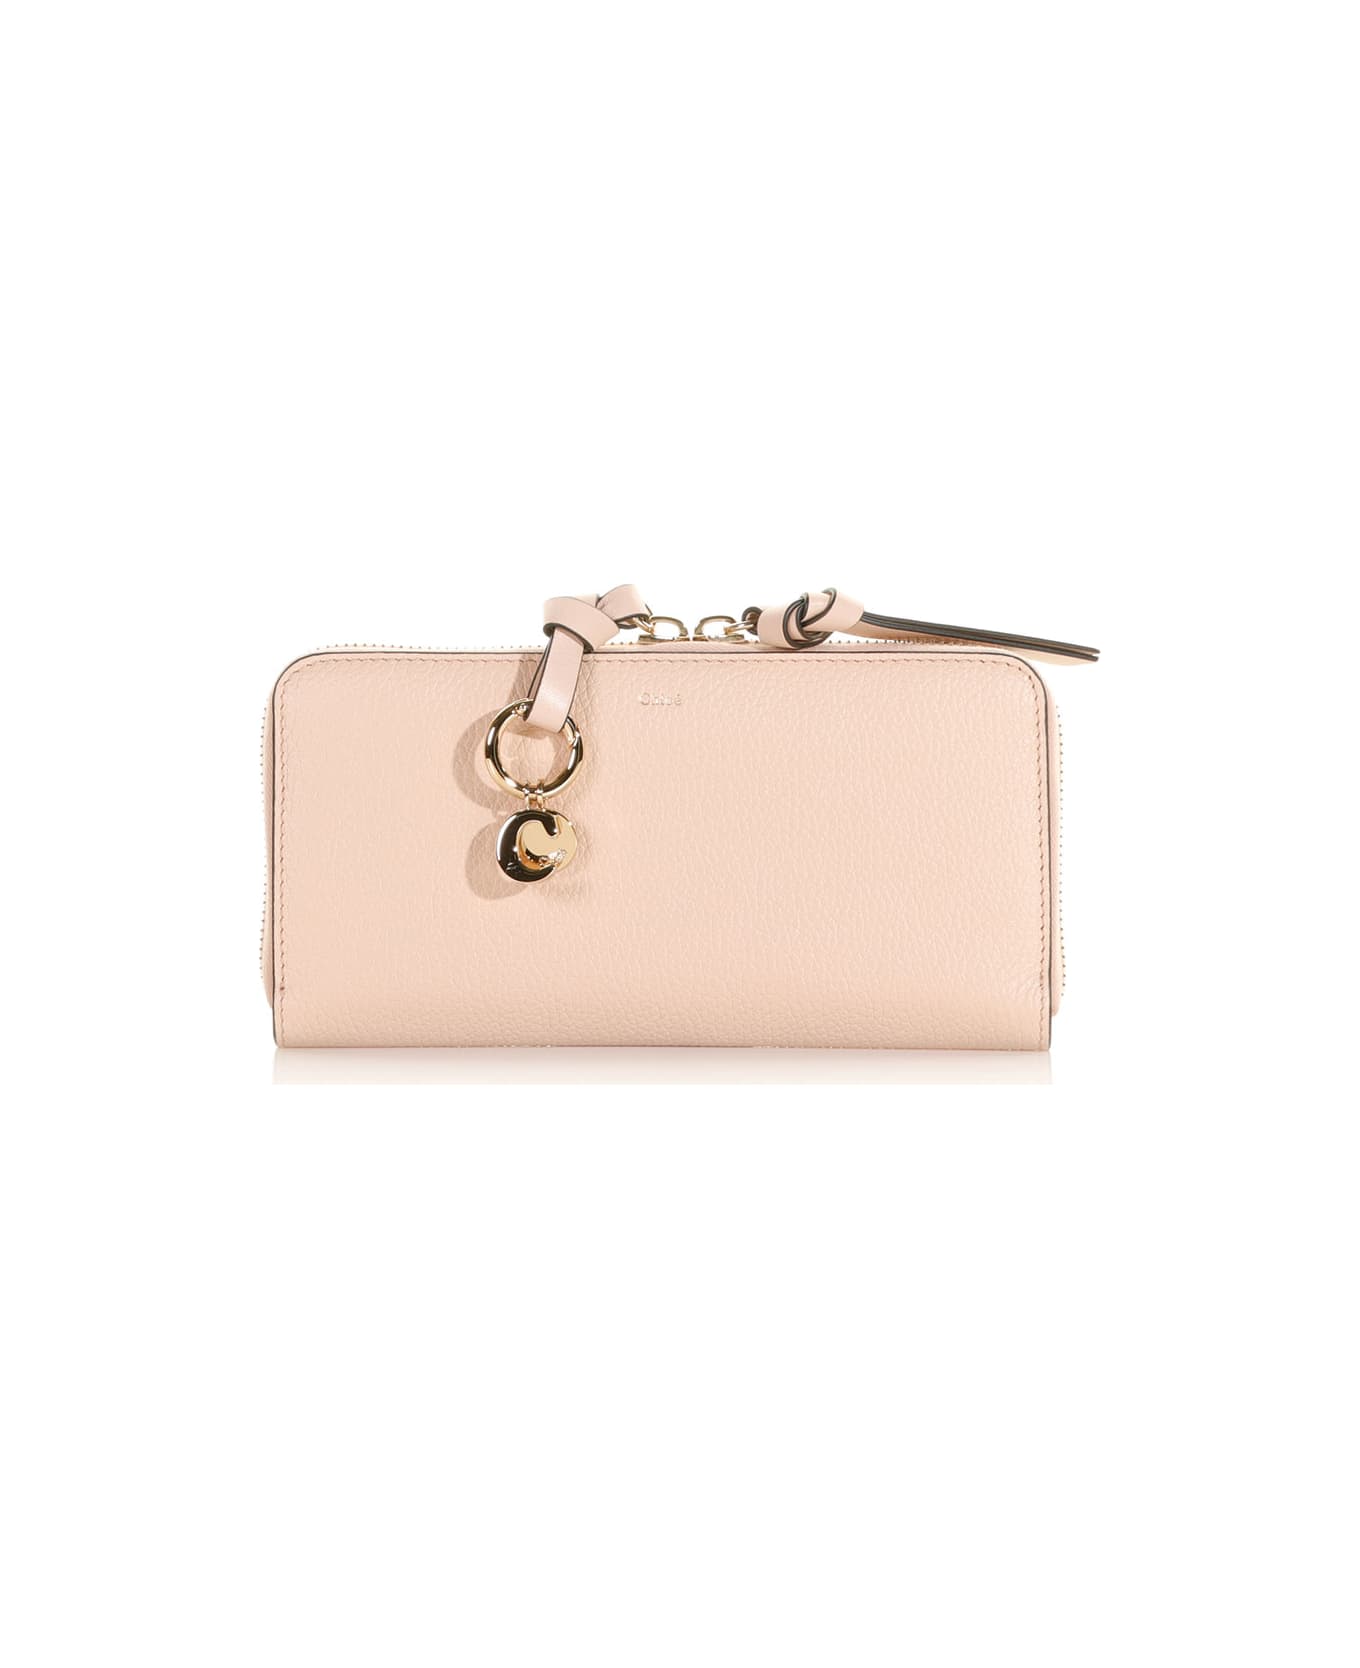 Chloé Full Zip Leather Wallet - CEMENT PINK